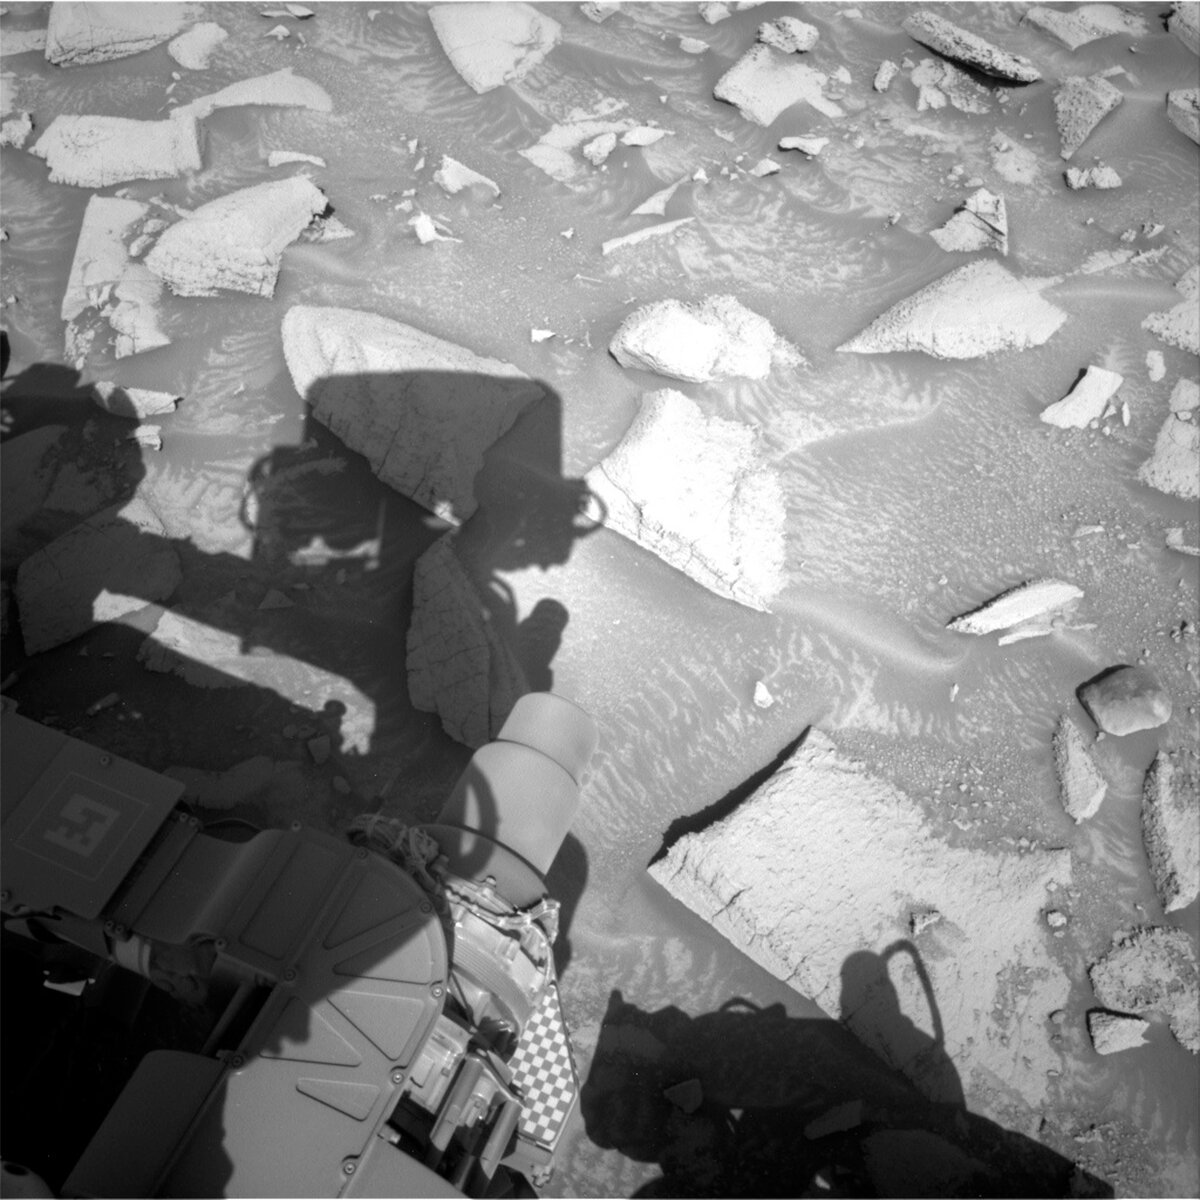 Read article: Sols 3909-3911: A Frosty Anniversary Weekend for Curiosity